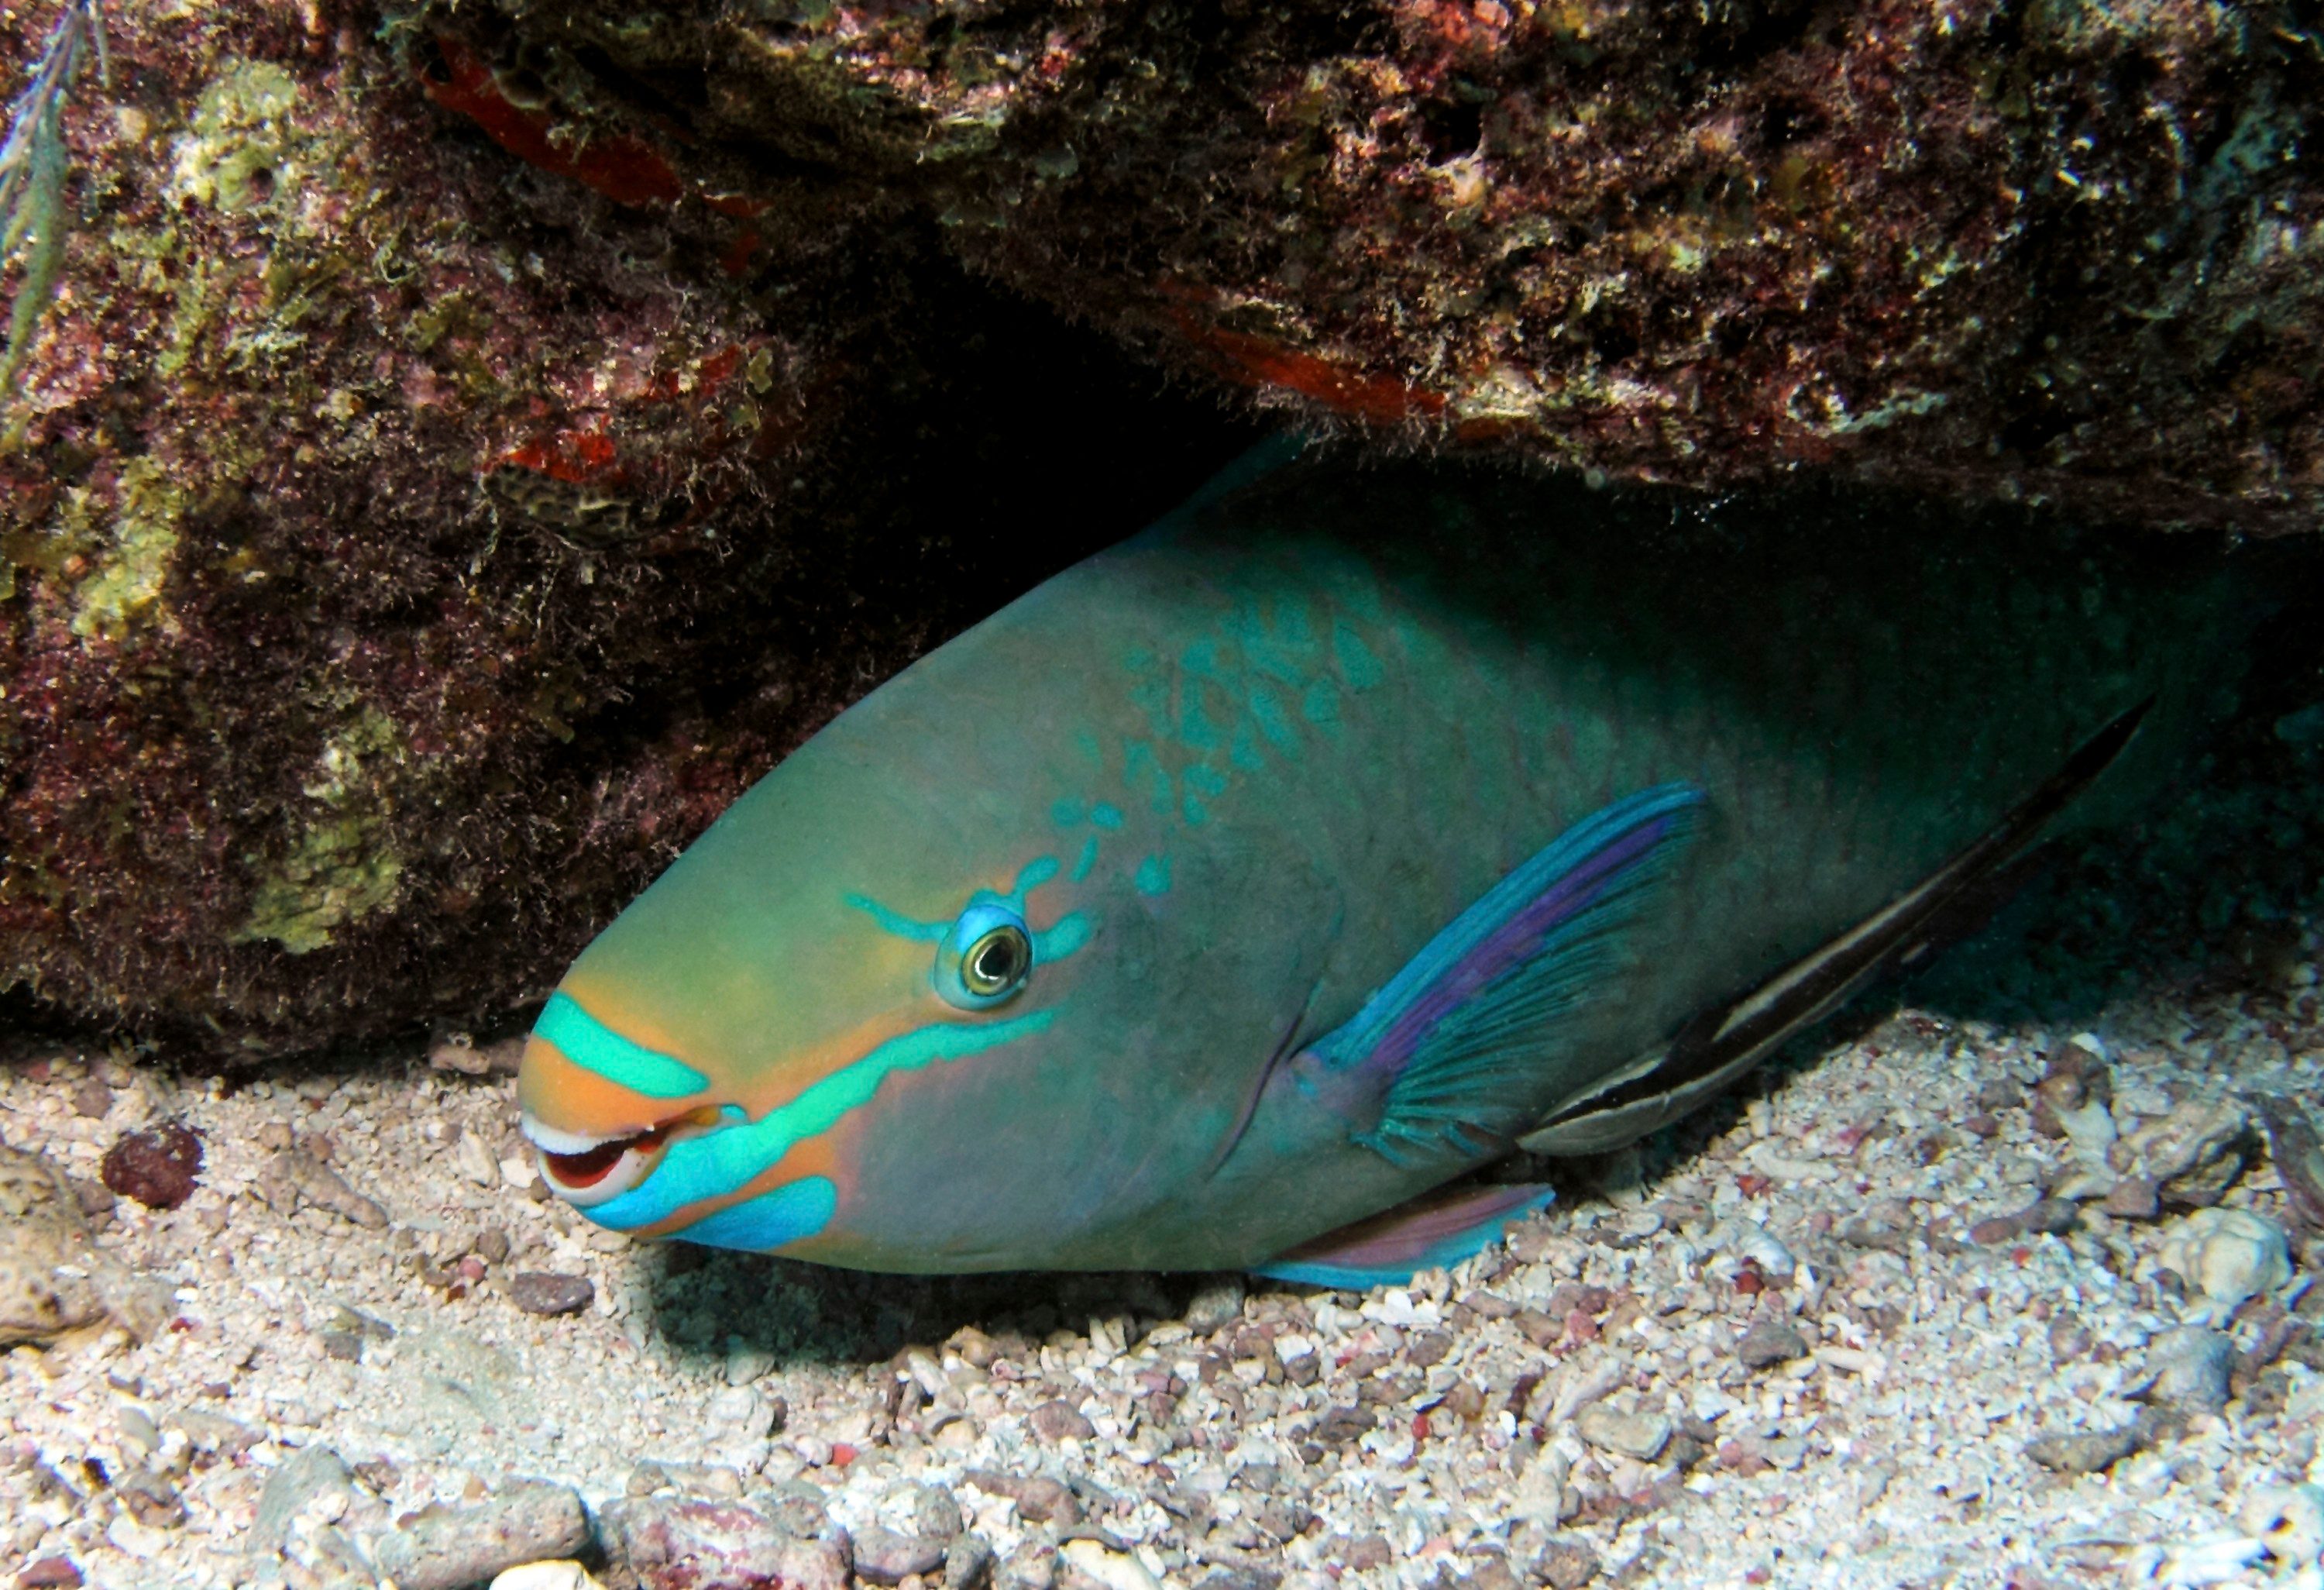 1. Parrotfish Sleep in a Bag of Their Own Mucus